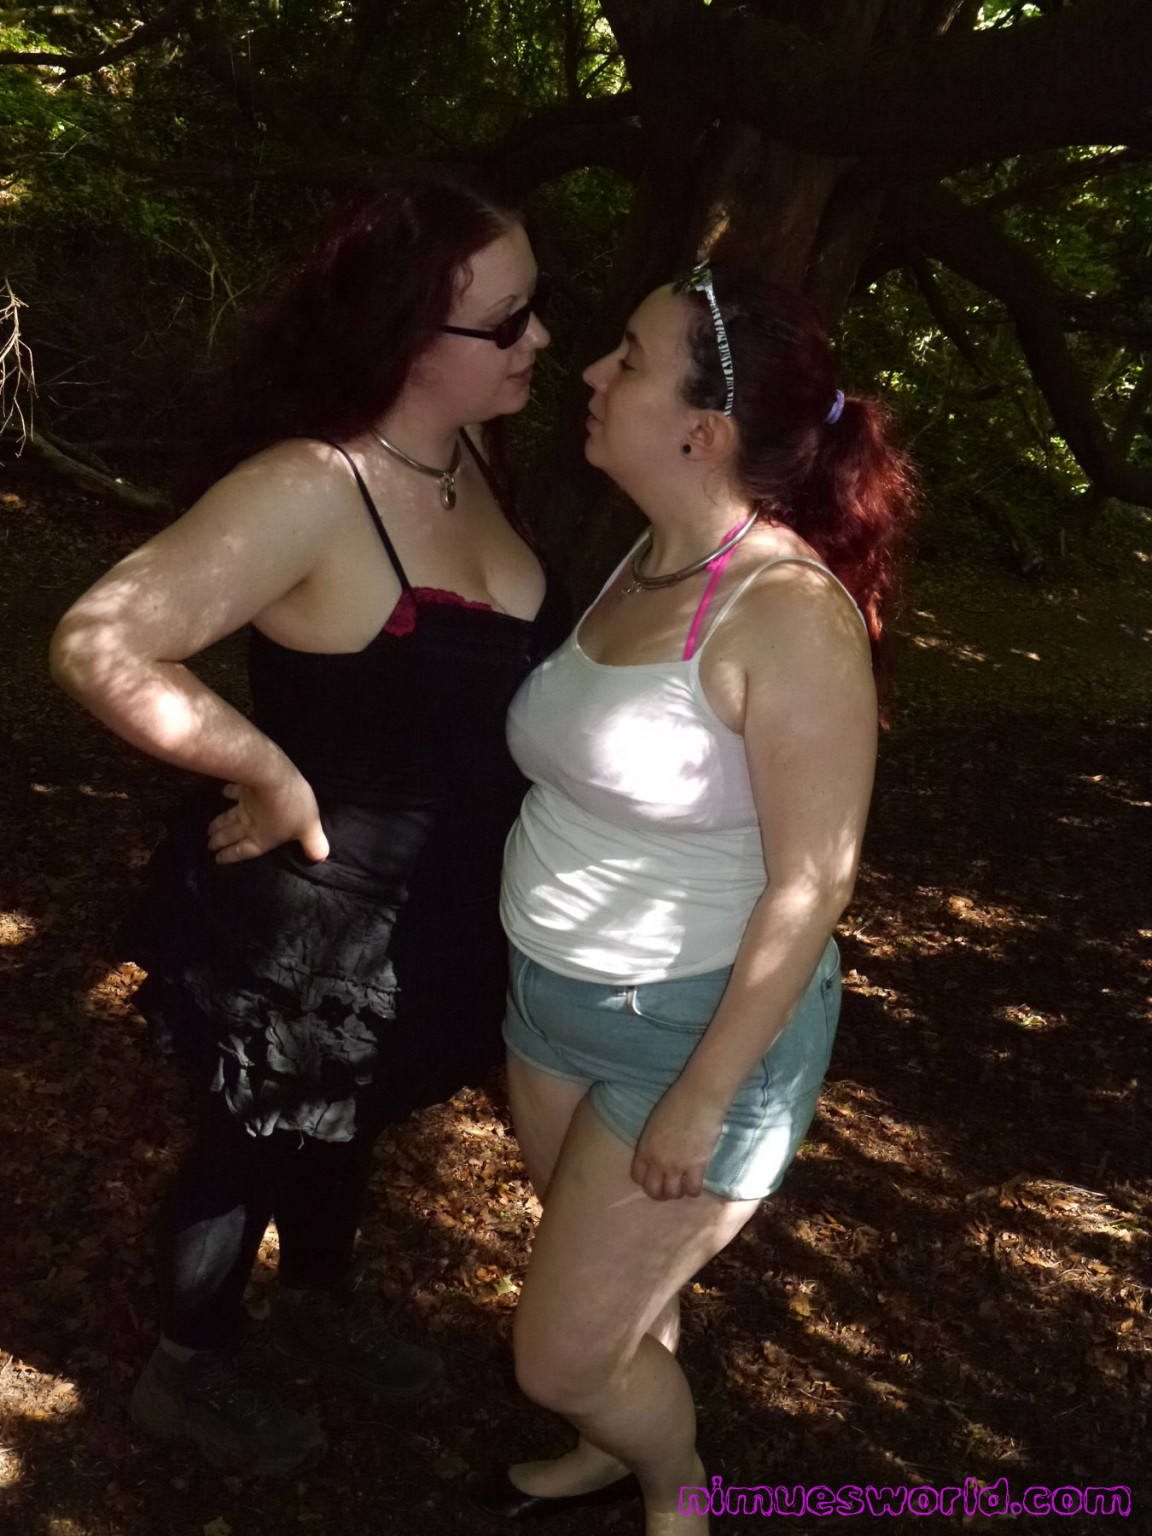 British lesbian bbw babes Rosie and Nimue outdoors making love and having sexy f #74638434